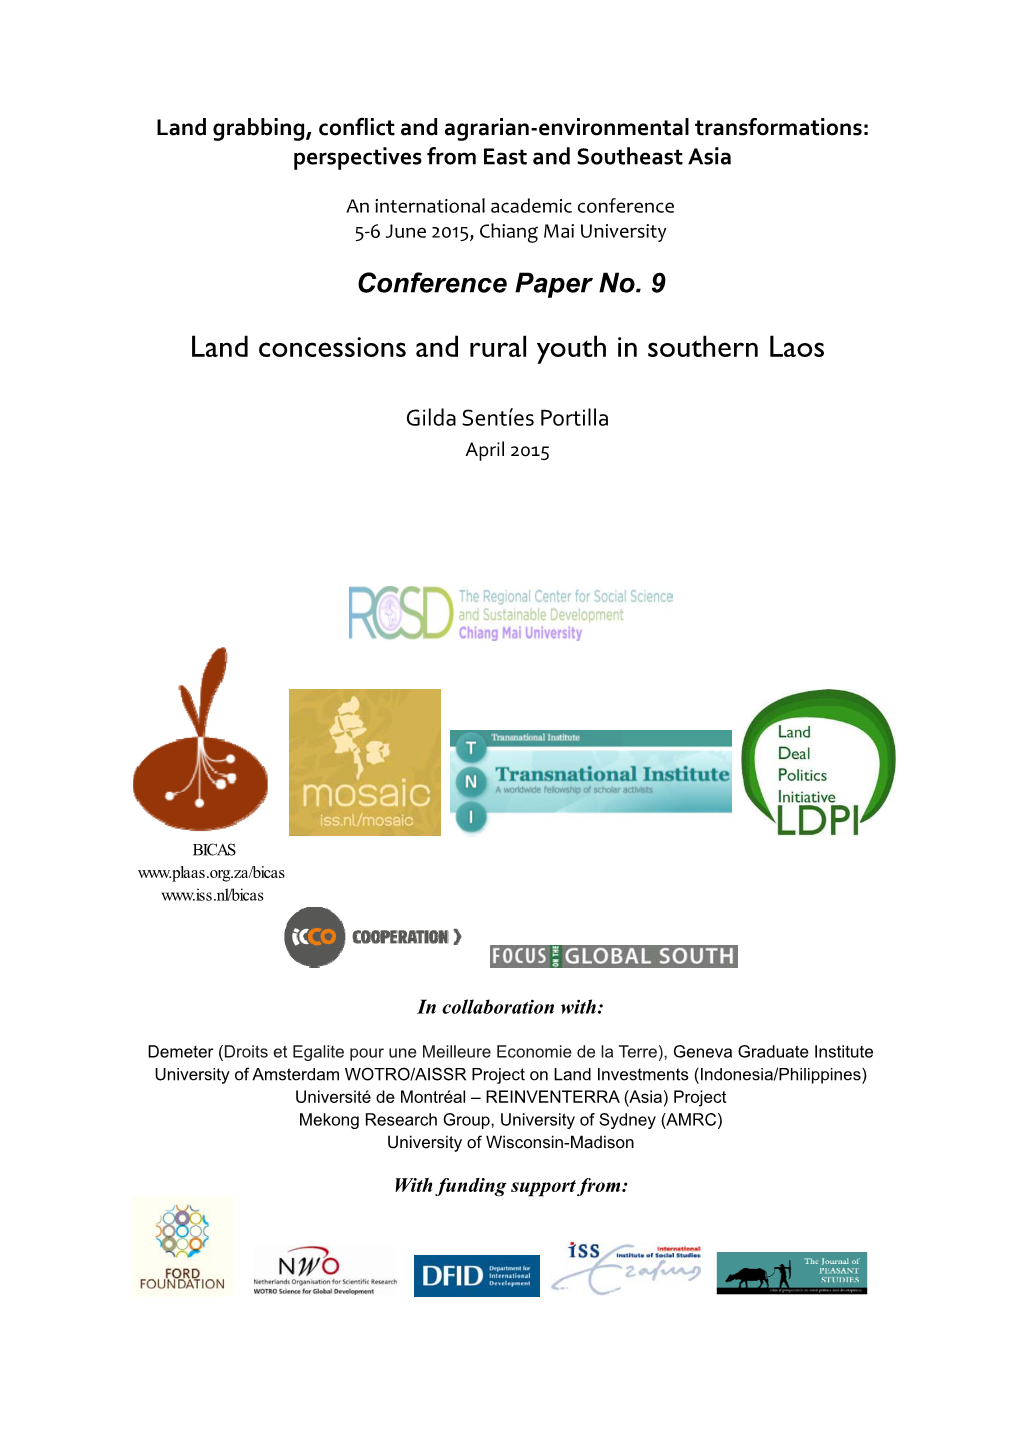 Land Concessions and Rural Youth in Southern Laos